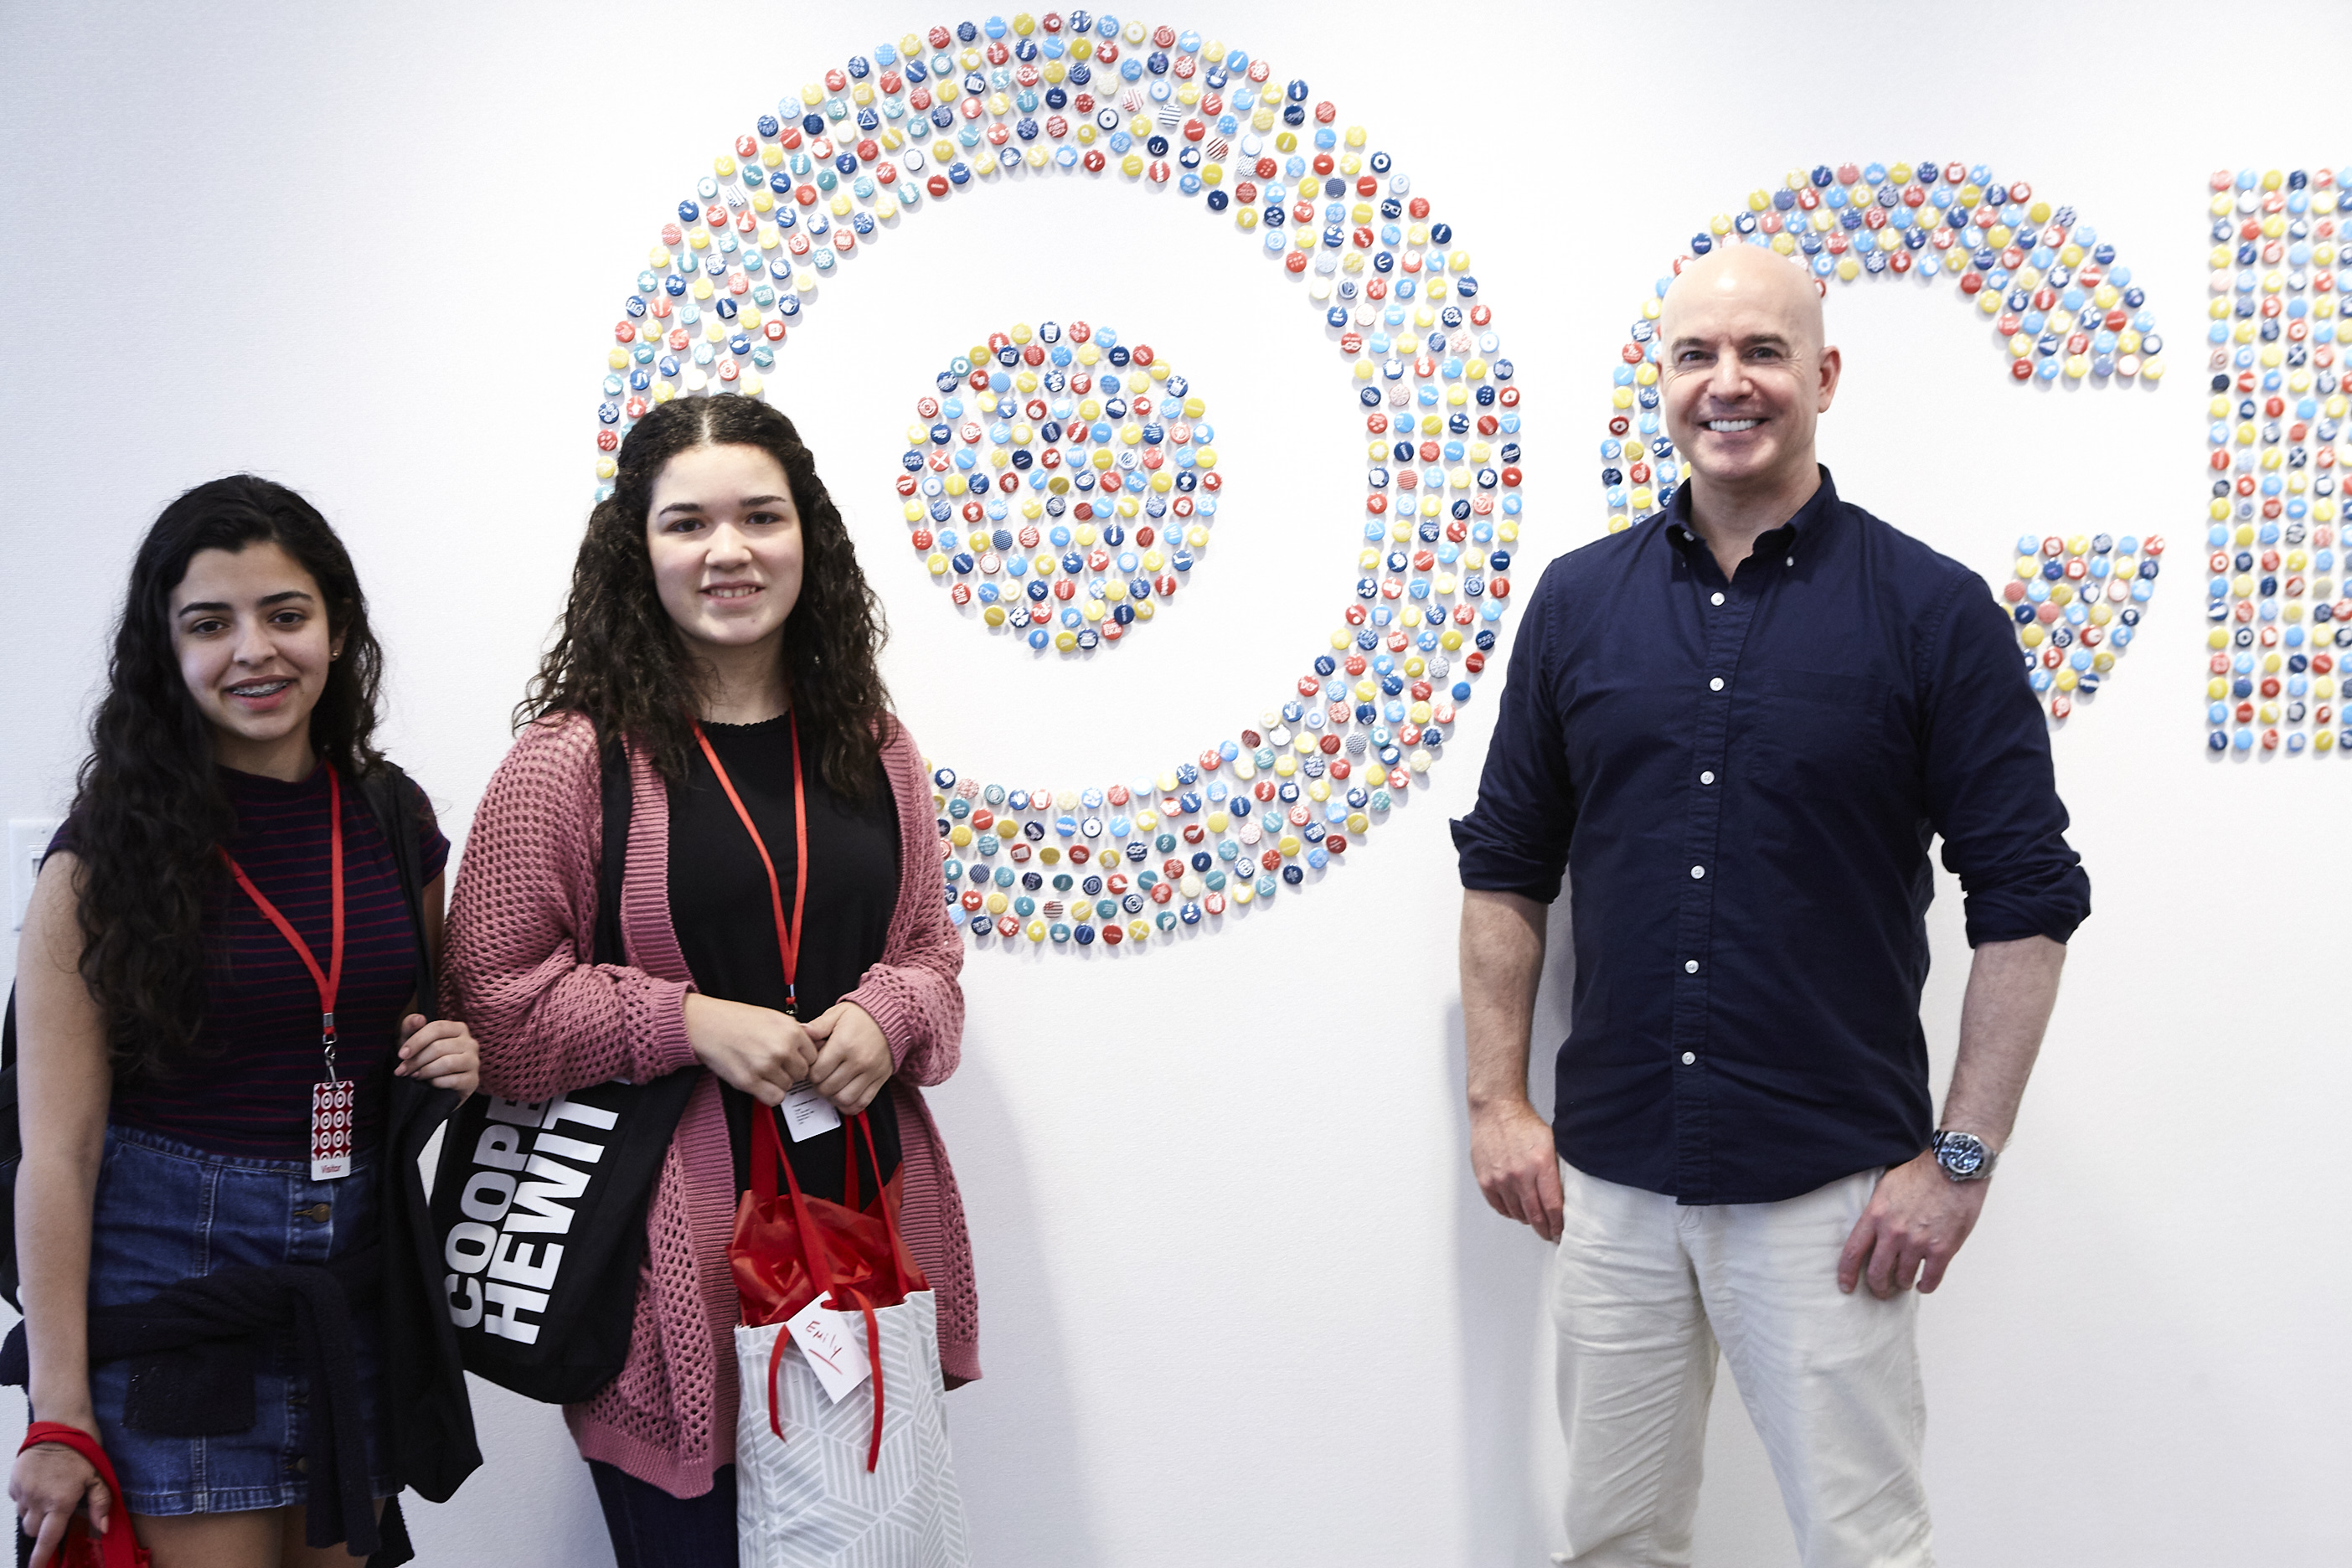 Two young women stand with a man in front of a white wall with a target on it made up of small, colorful circles